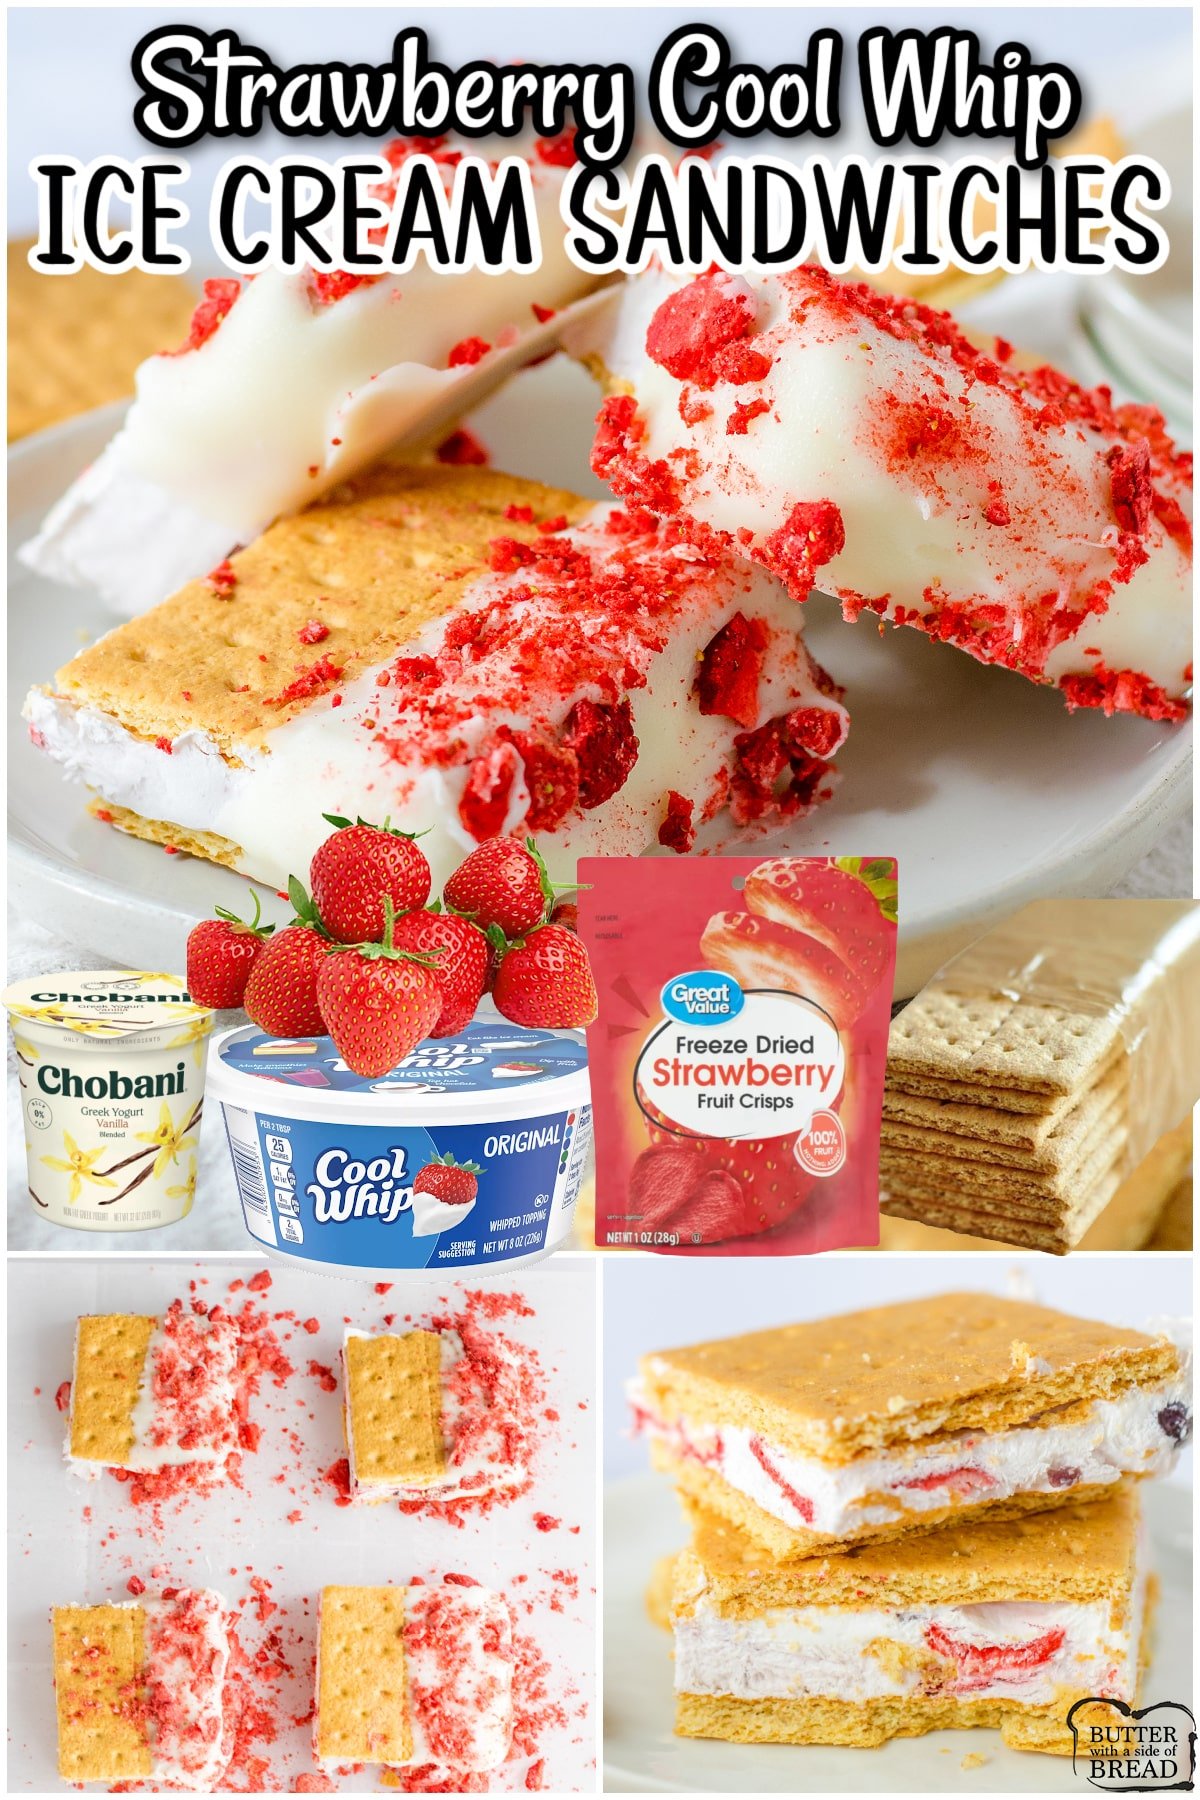 Strawberry Cool Whip Ice Cream Sandwiches made easy with just 5 ingredients! Chilled, refreshing graham cracker sandwiches with bright strawberry flavor everyone loves!